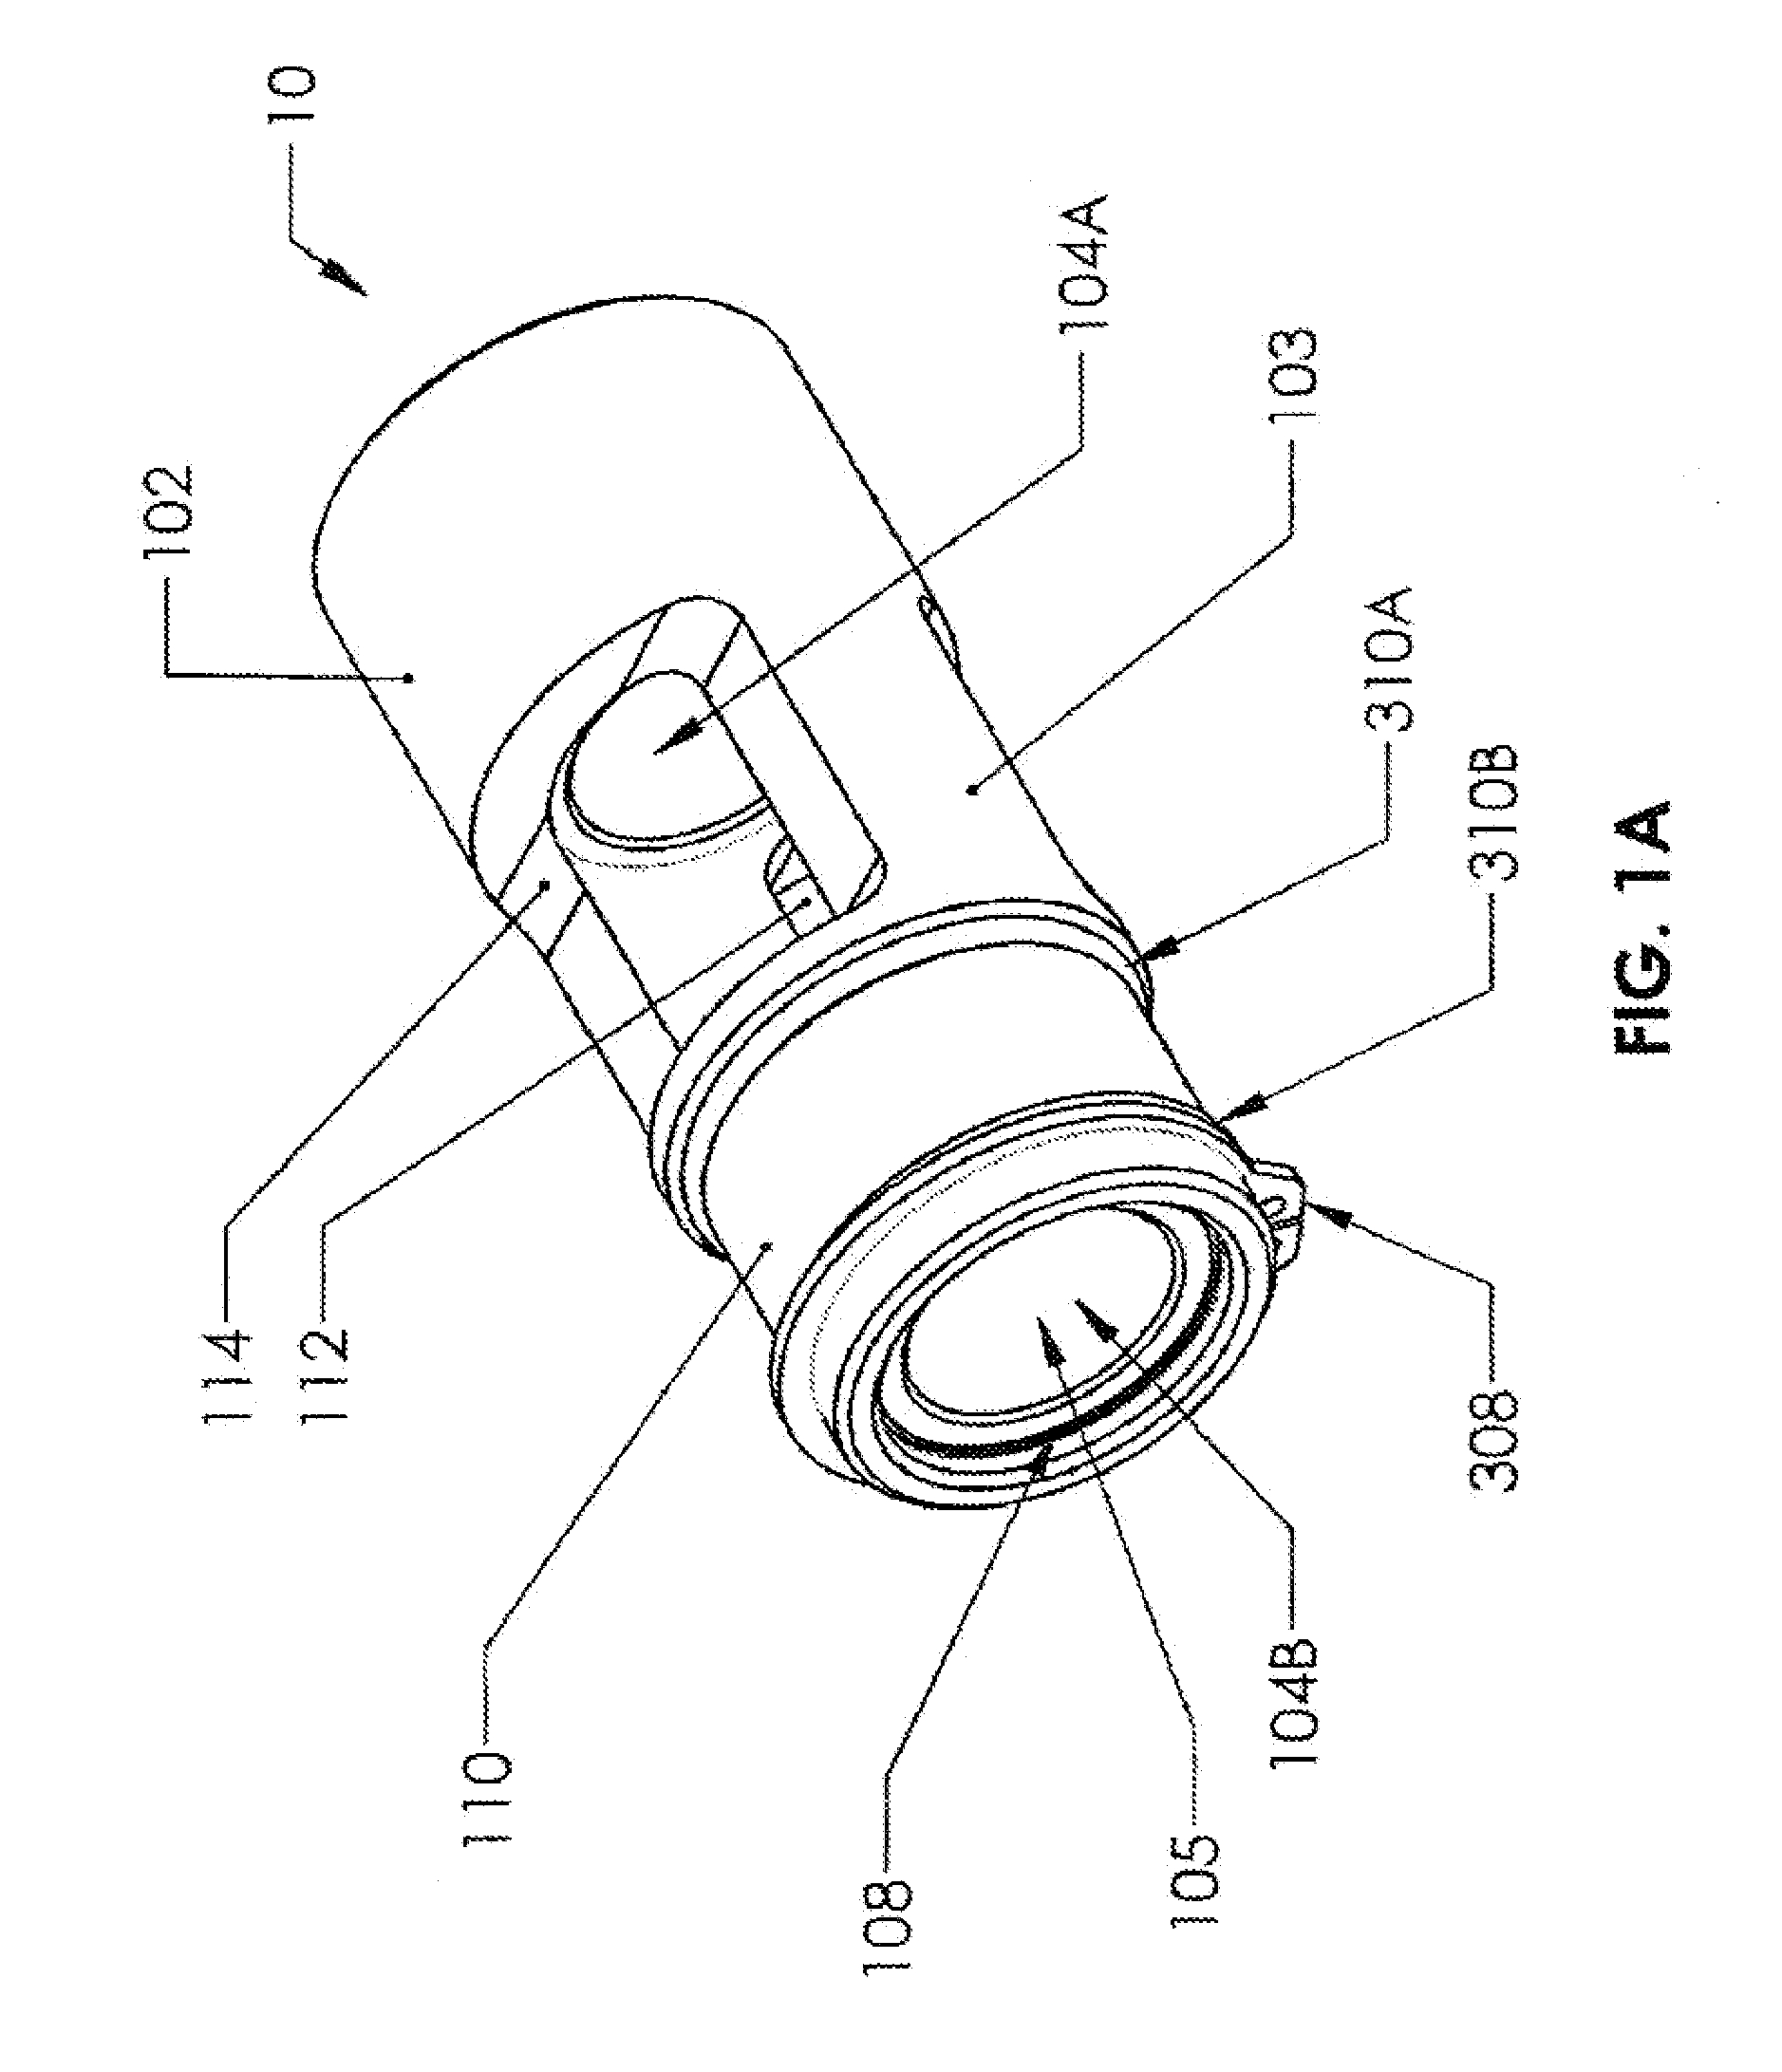 Guiding element for actuator